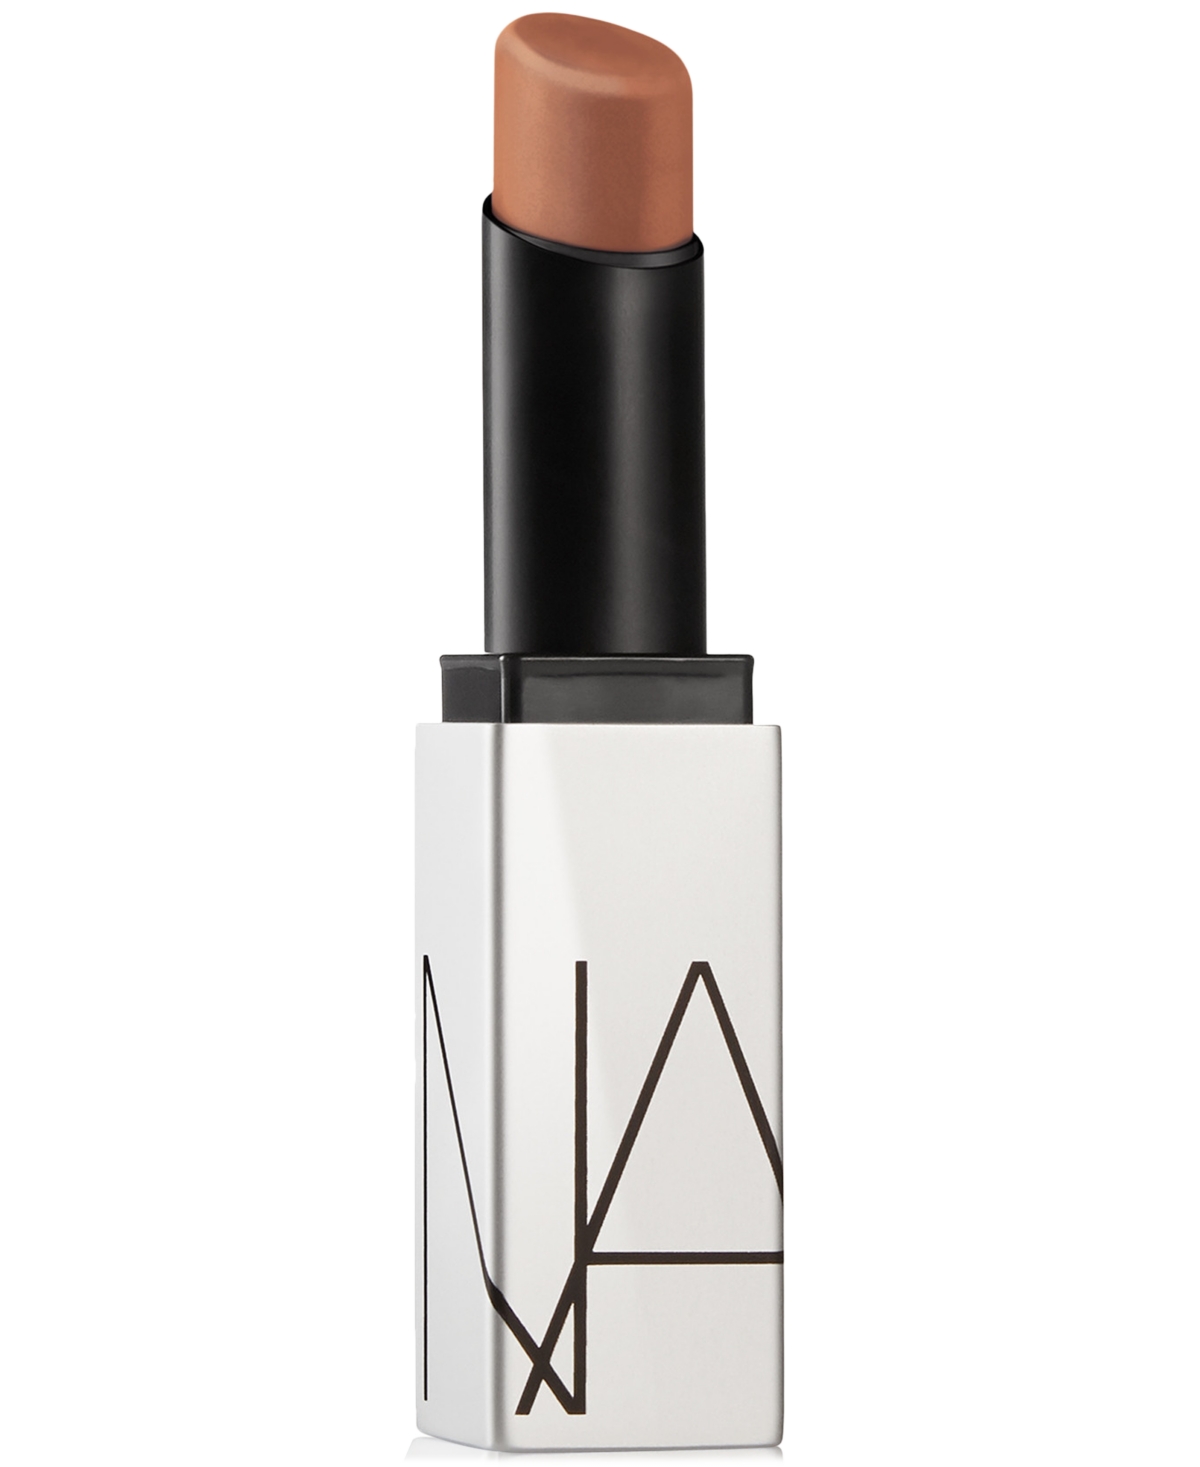 Nars Soft Matte Tinted Lip Balm In Brief Encounter - Neutral Nude